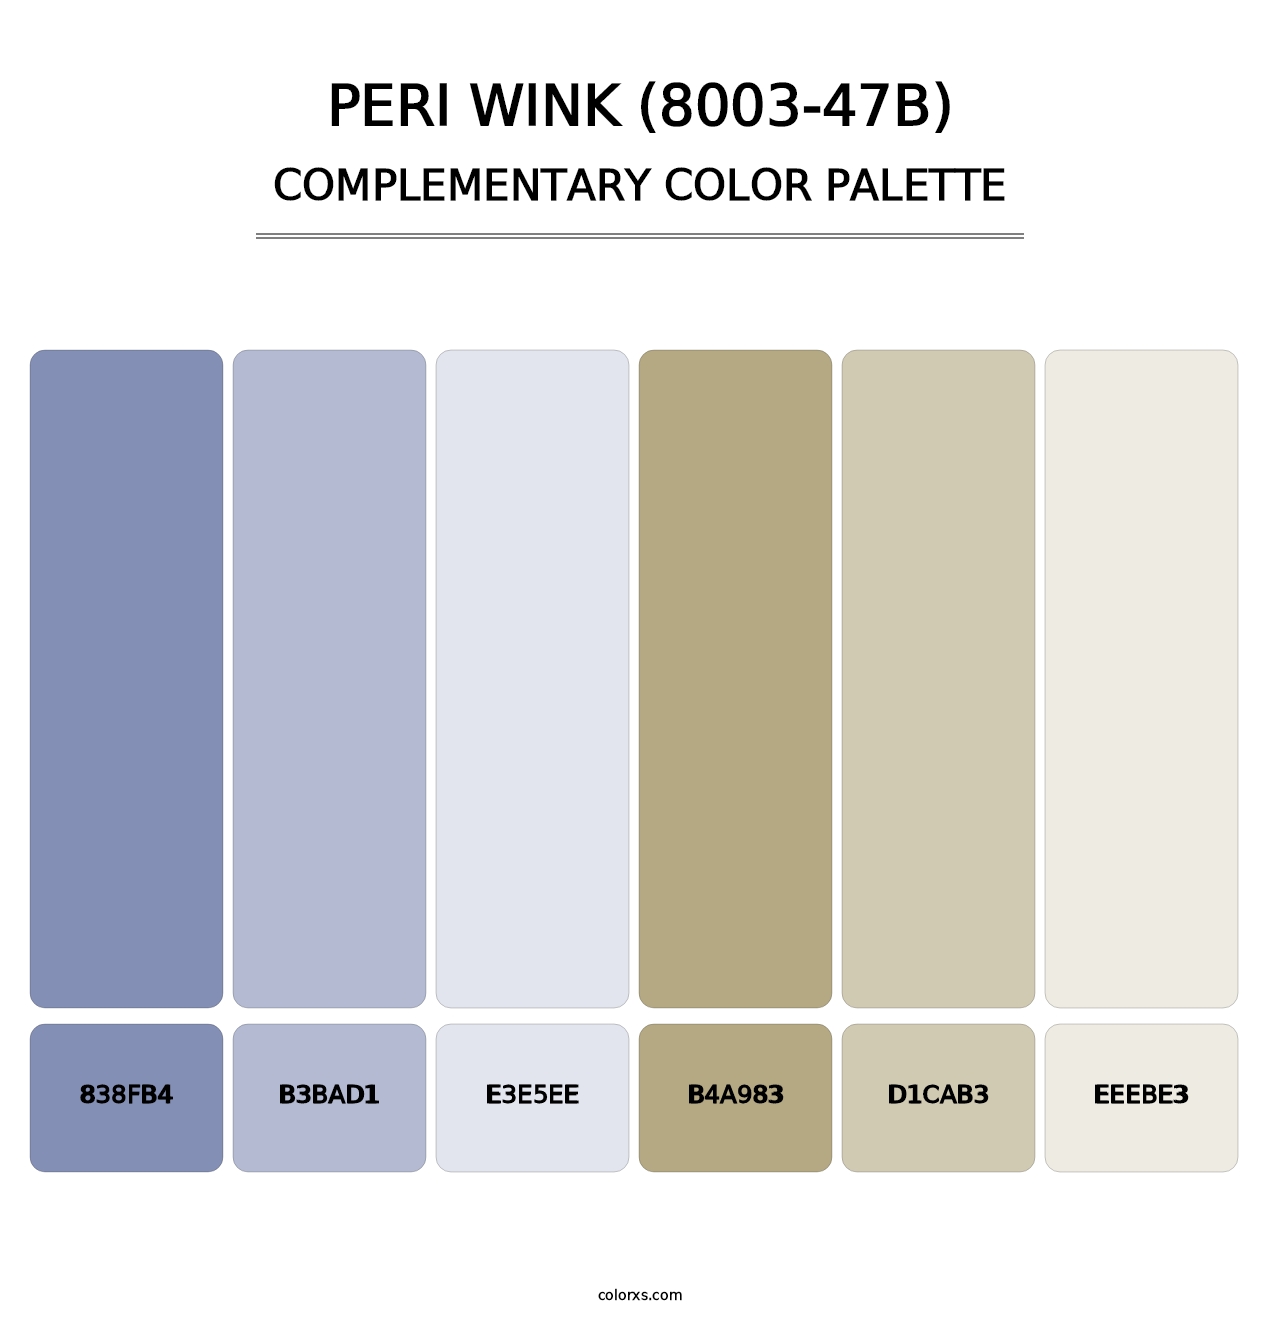 Peri Wink (8003-47B) - Complementary Color Palette